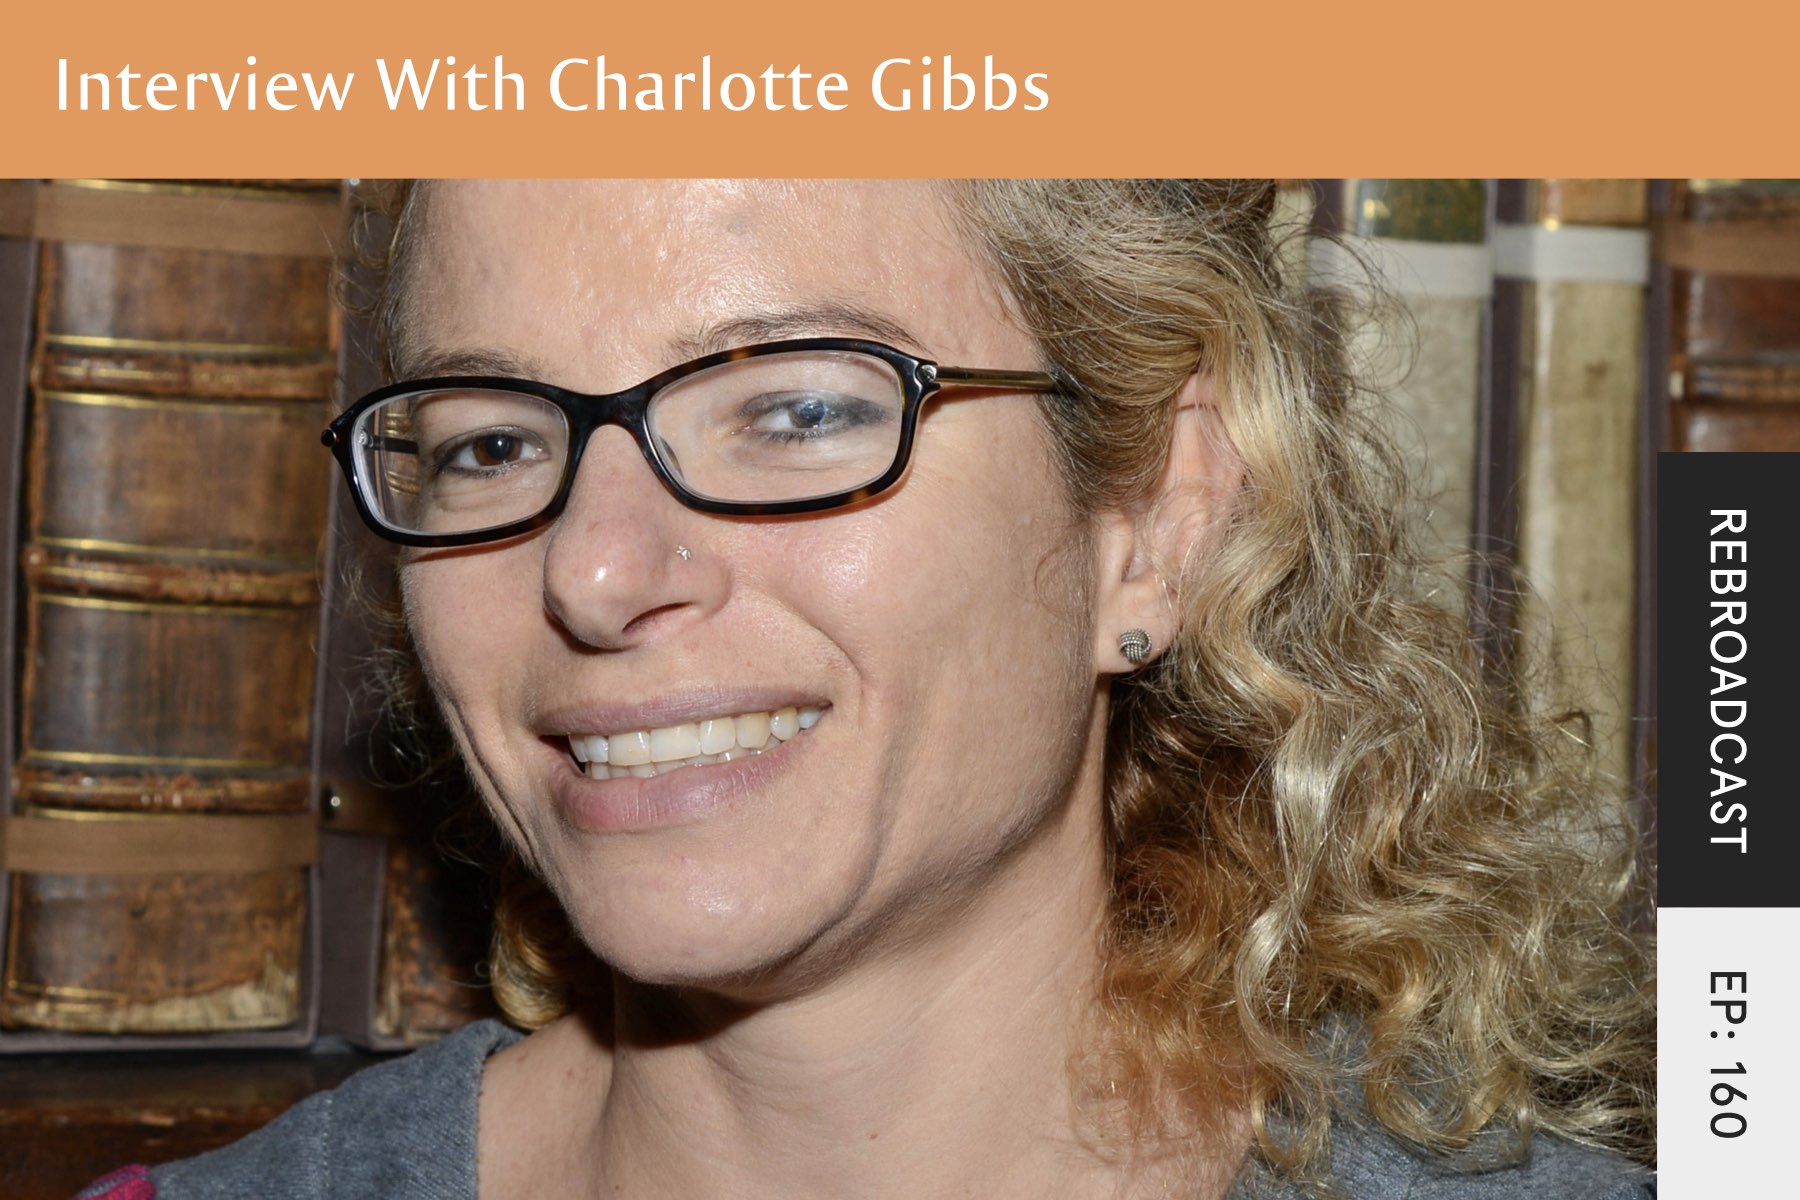 Rebroadcast: Interview with Charlotte Gibbs - Seven Health: Eating Disorder Recovery and Anti Diet Nutritionist